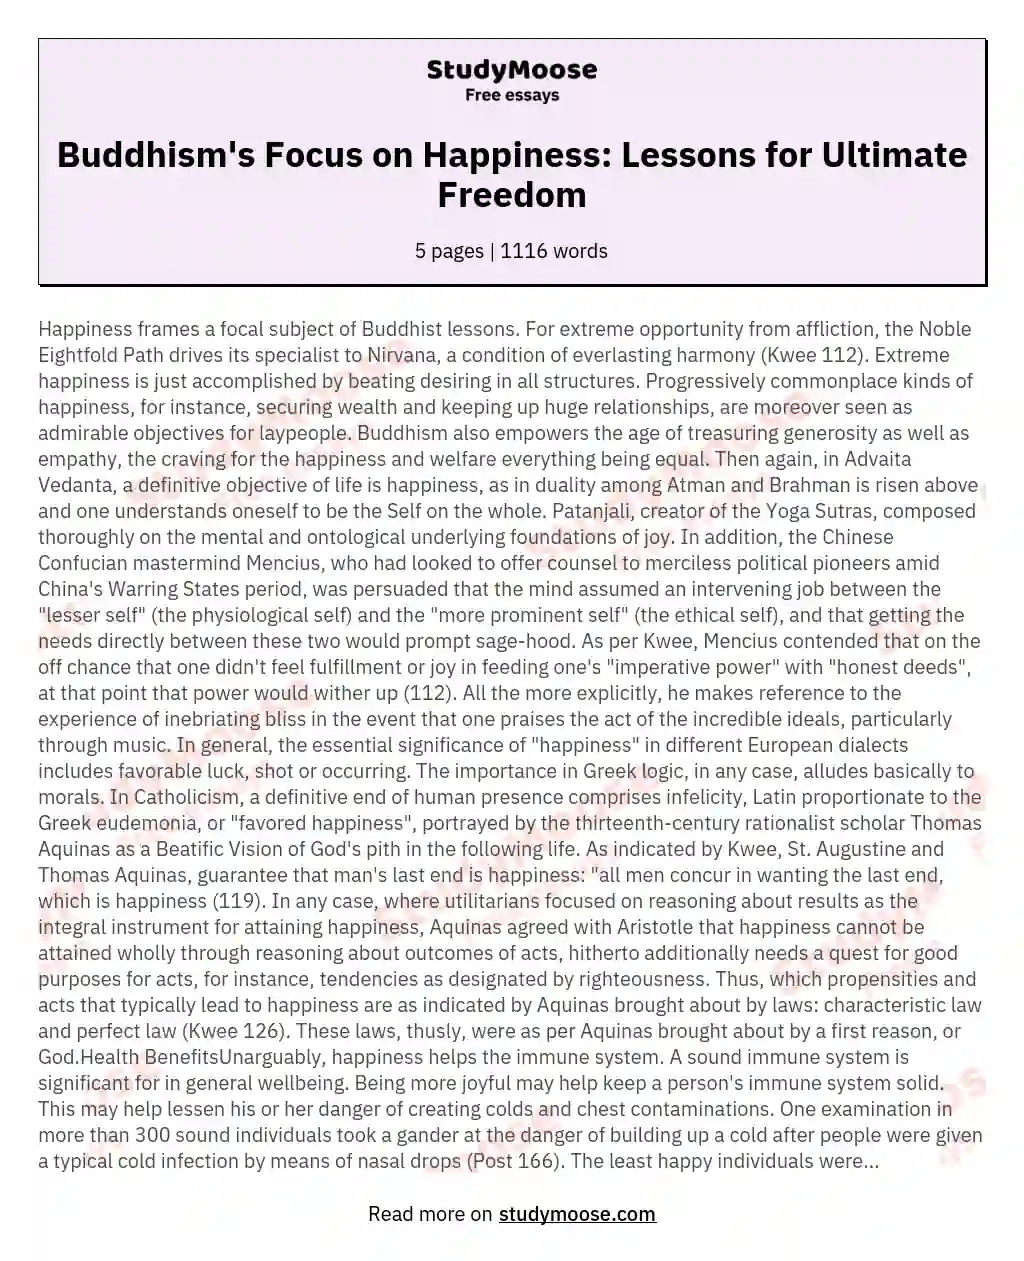 Buddhism's Focus on Happiness: Lessons for Ultimate Freedom essay